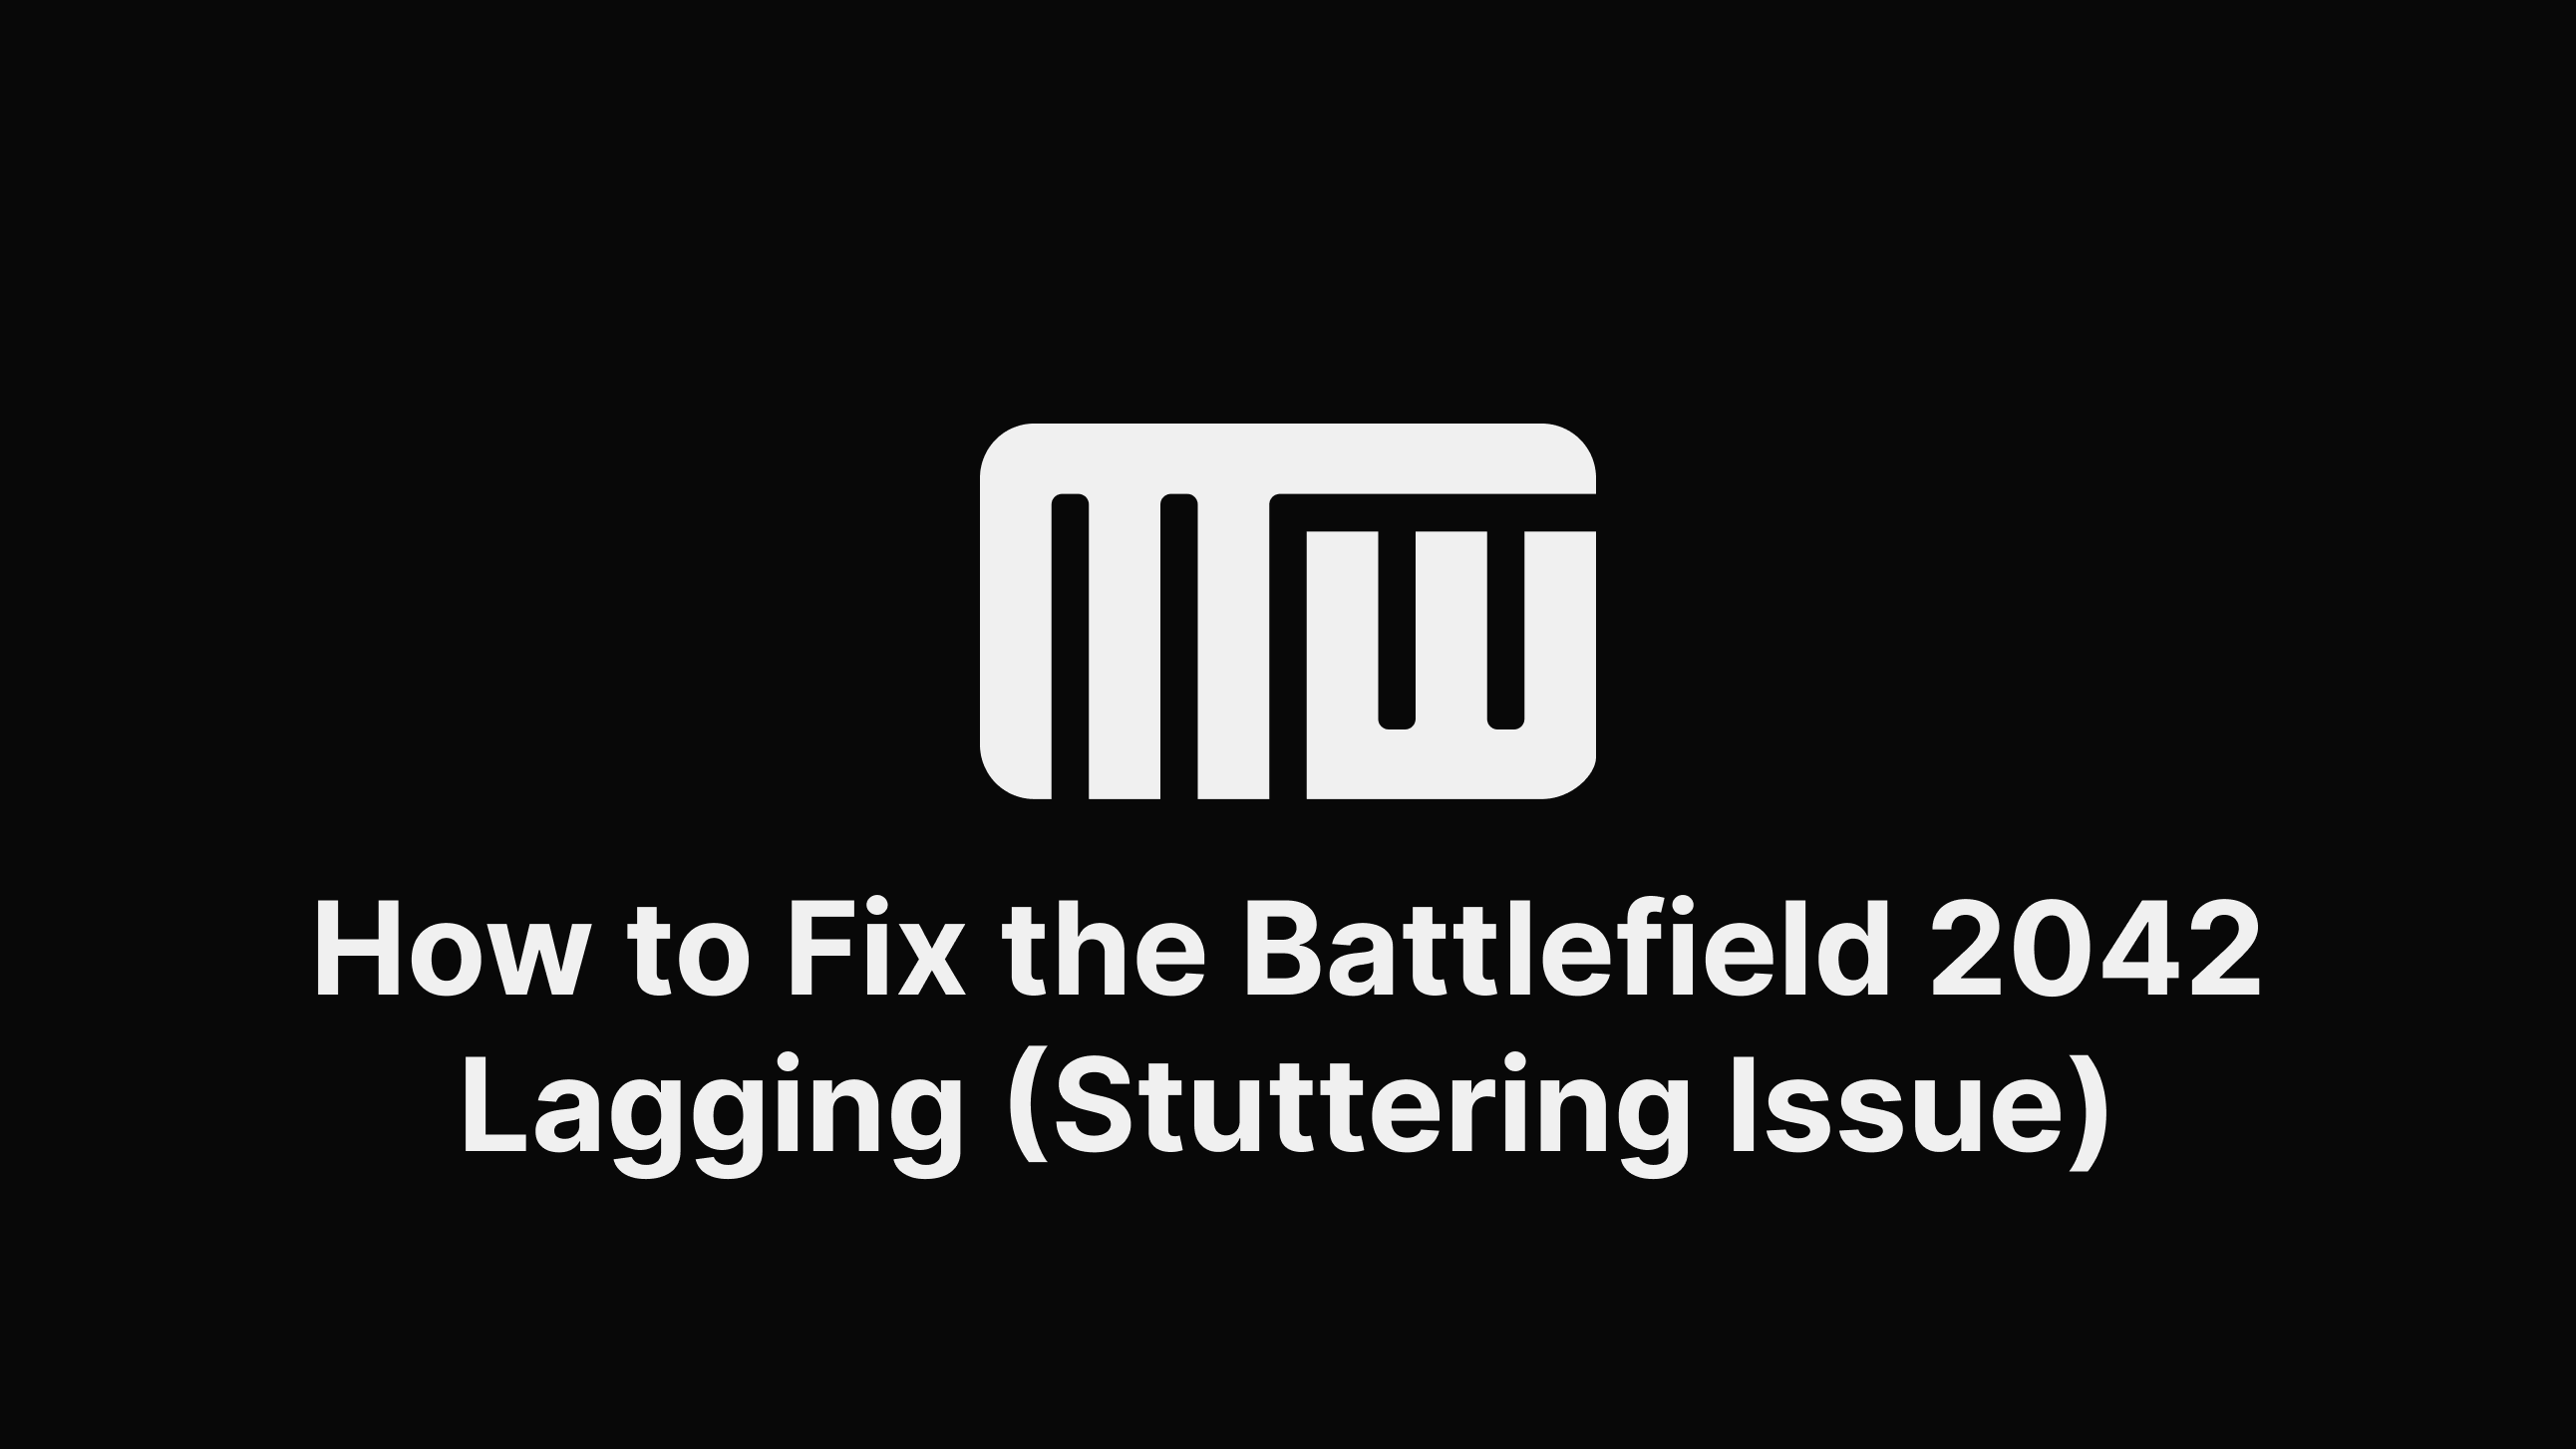 How to Fix the Battlefield 2042 Lagging (Stuttering Issue)